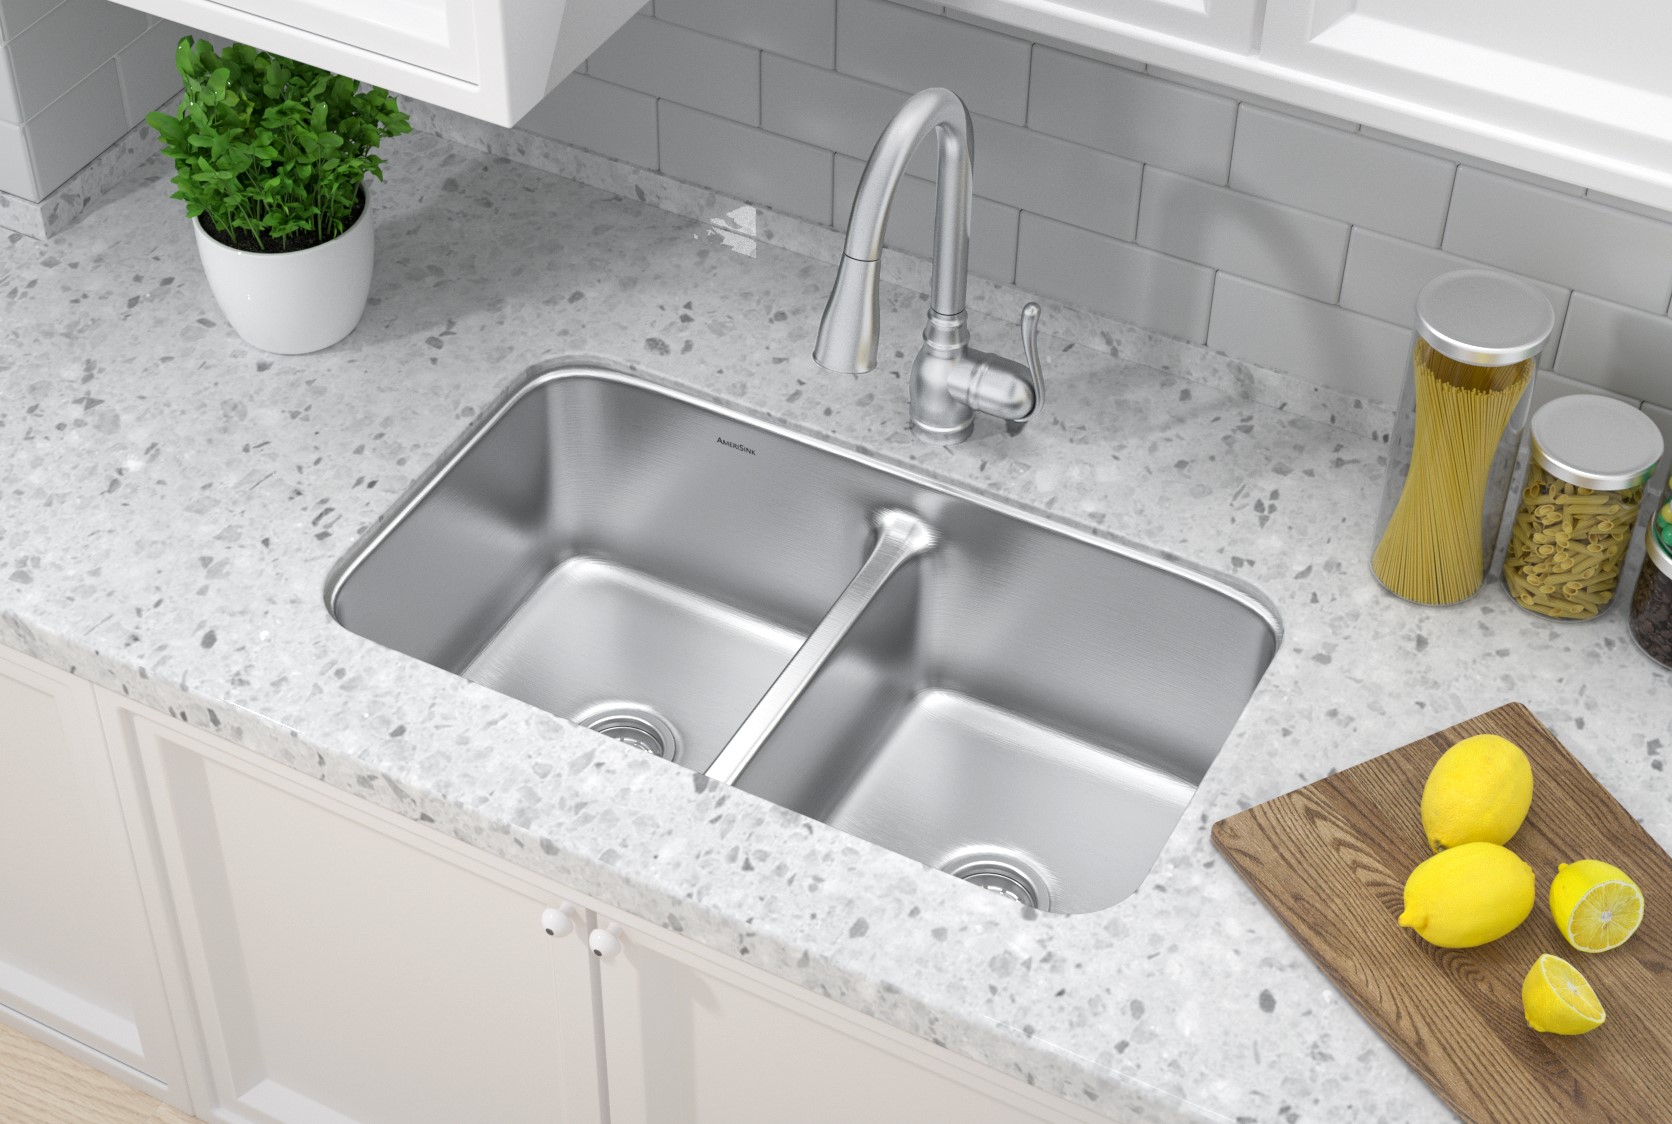 purpose of double bowl kitchen sink